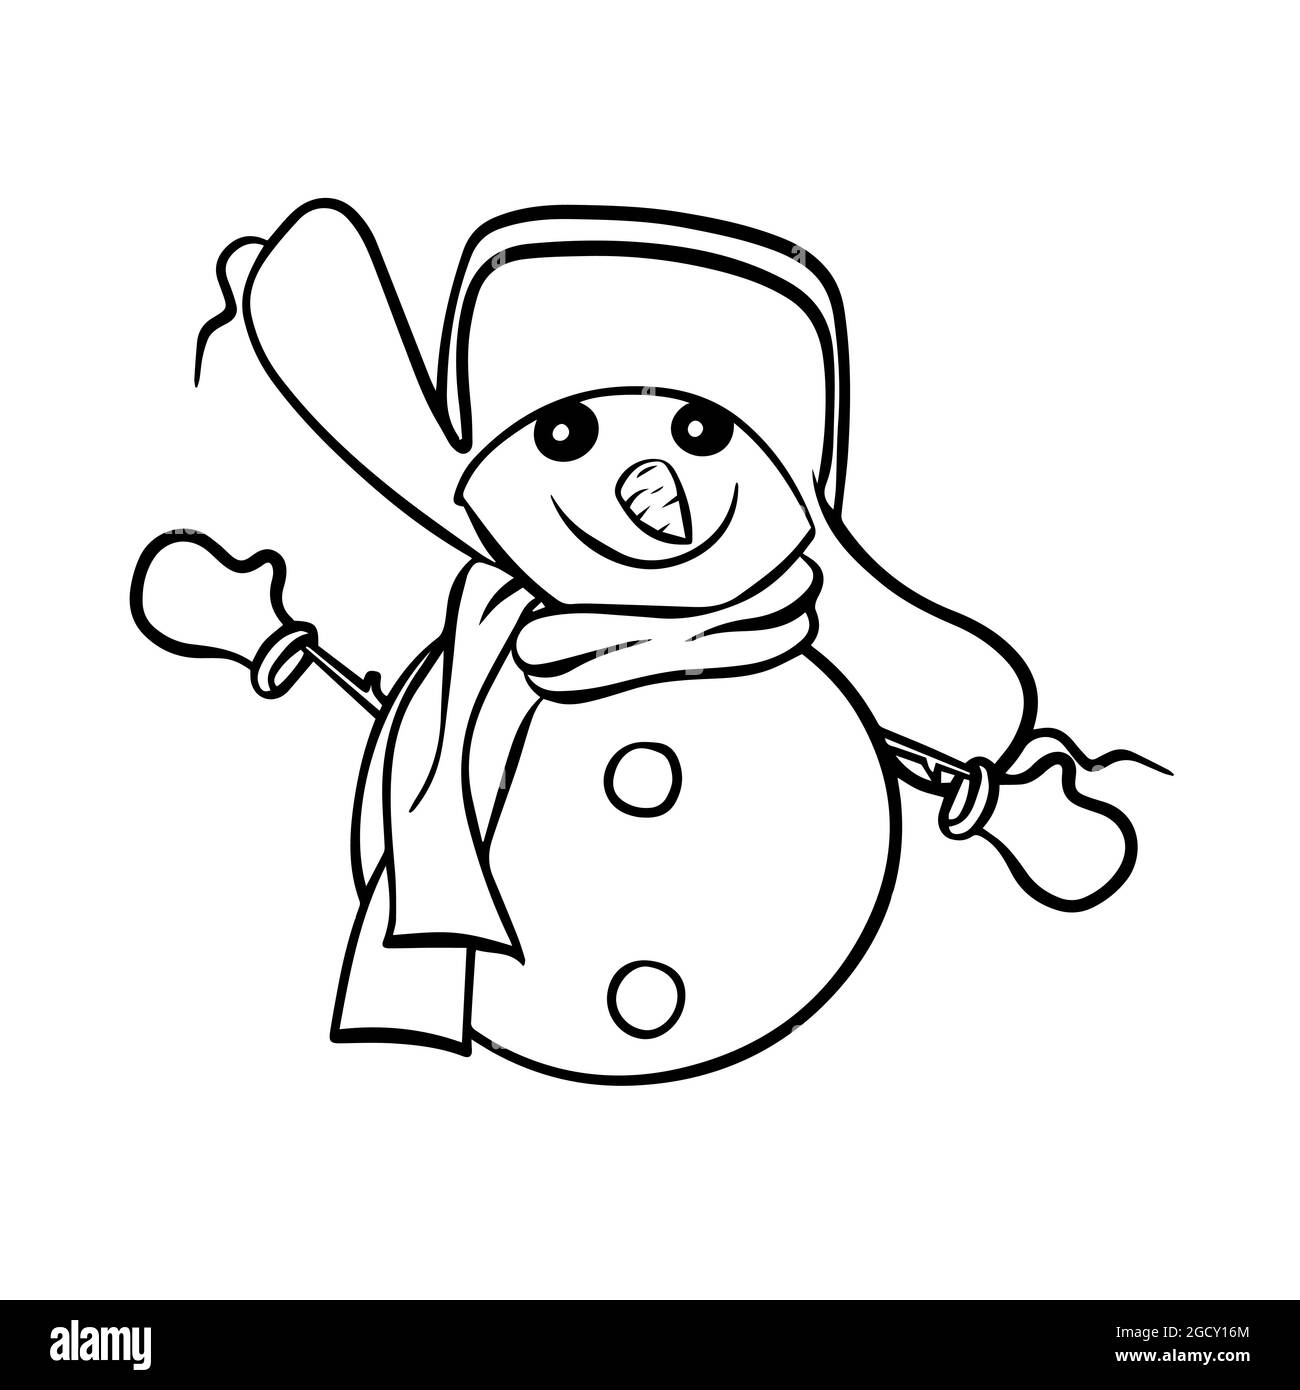 Cute snowman in a hat and scarf. Vector illustration in the doodle style. Suitable for anti-stress and children's coloring books Stock Vector